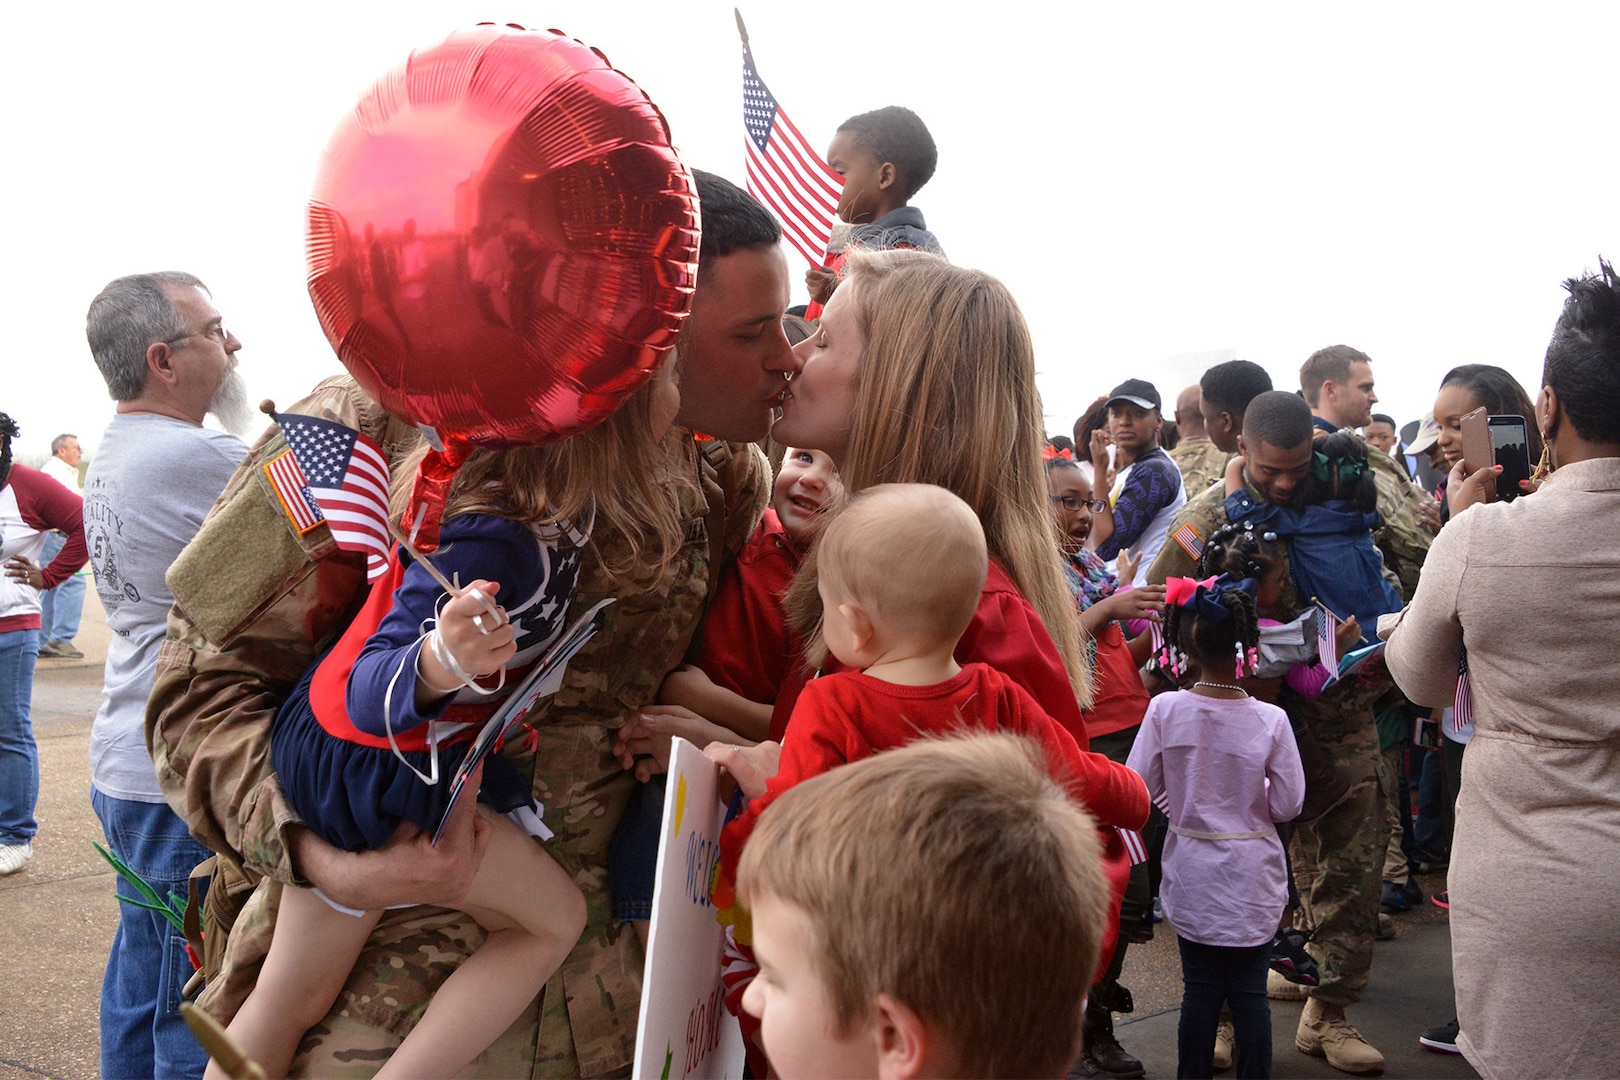 Staff Sgt. Chad Lawless, of Swartz, La., kisses his wife, Angela, and hugs his daughter, Lily, 4, and sons, Luke, 2, and Levi, 6 months. Lawless met Levi for the first time in person at the welcome-home event in Monroe, La., Dec. 24, 2015. More than 150 members of the Louisiana National Guard’s 1023rd Engineer Company, 528th Engineer Battalion just completed a 10-month deployment to Kuwait, with additional missions to Jordan, Iraq and Afghanistan.